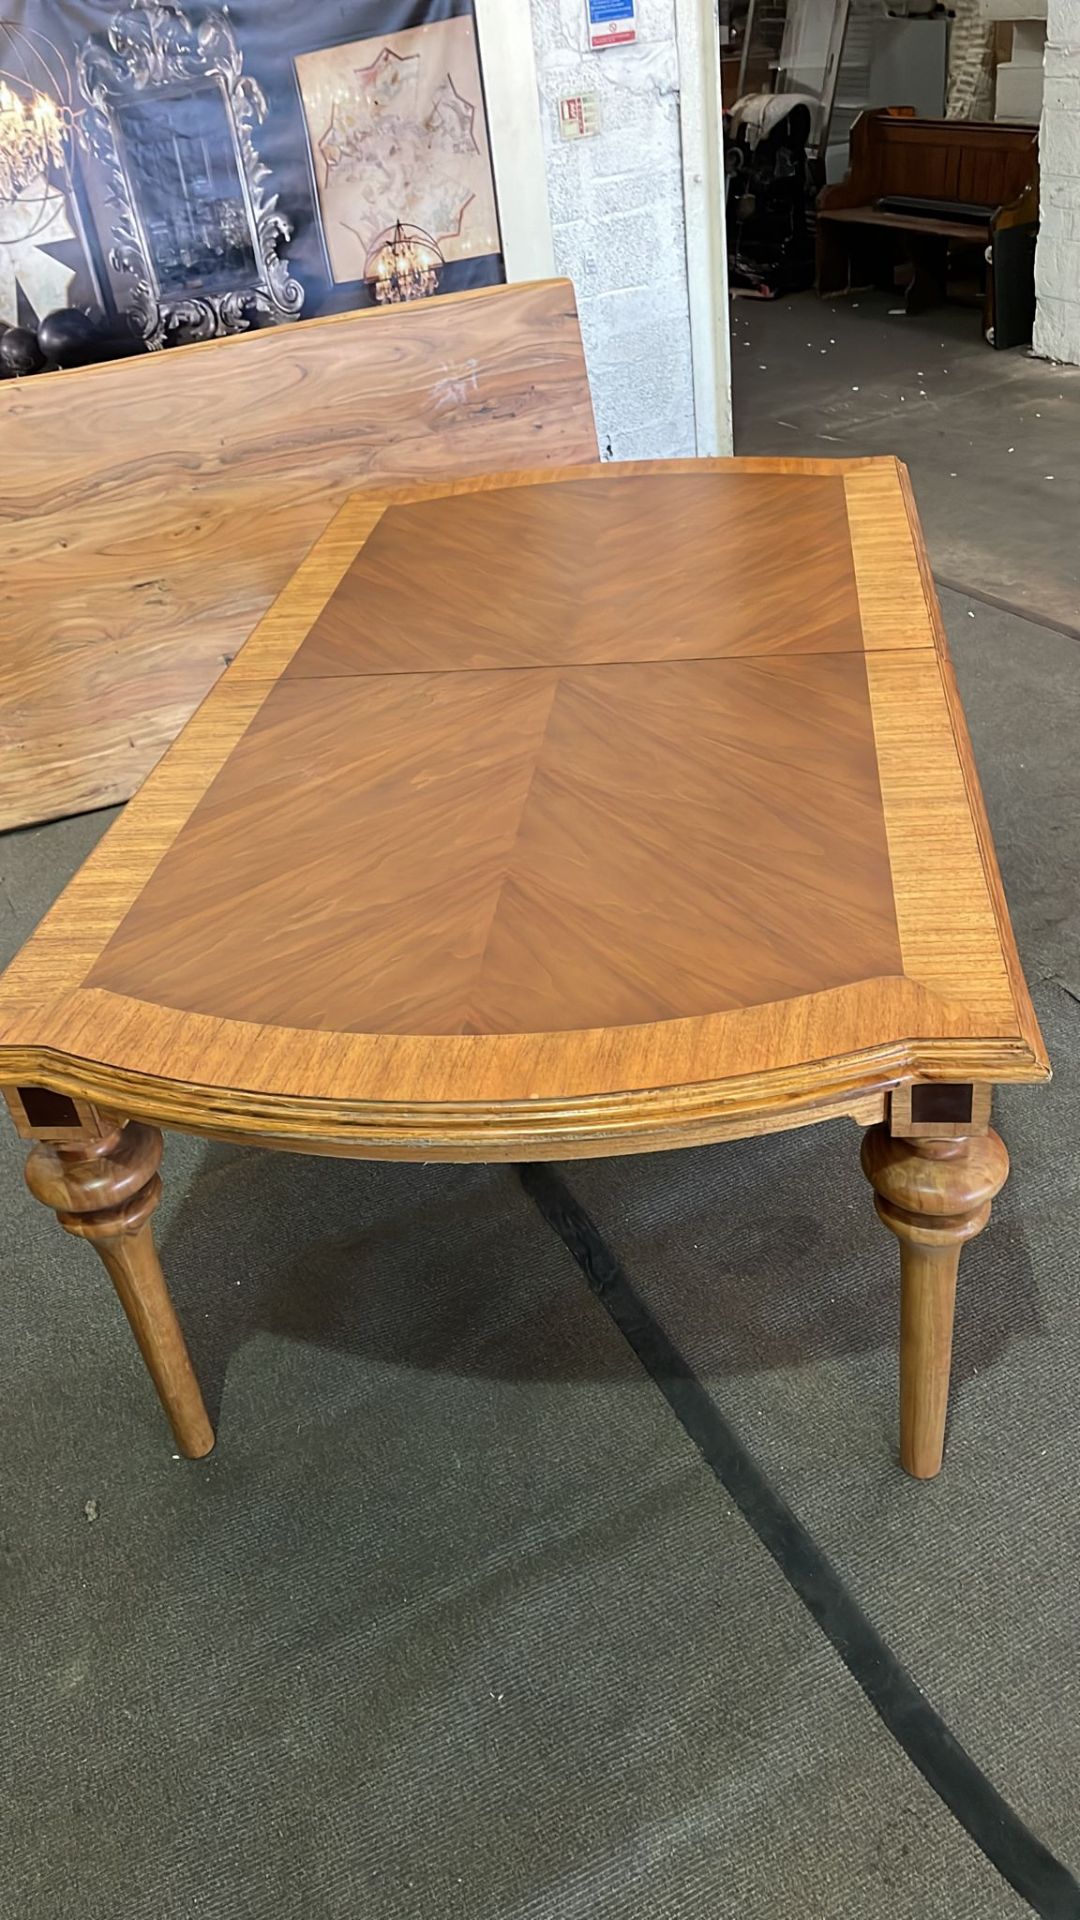 Spire dining table for repair/ restorationÂ Blonde European walnut with intricate inlays, antiqued